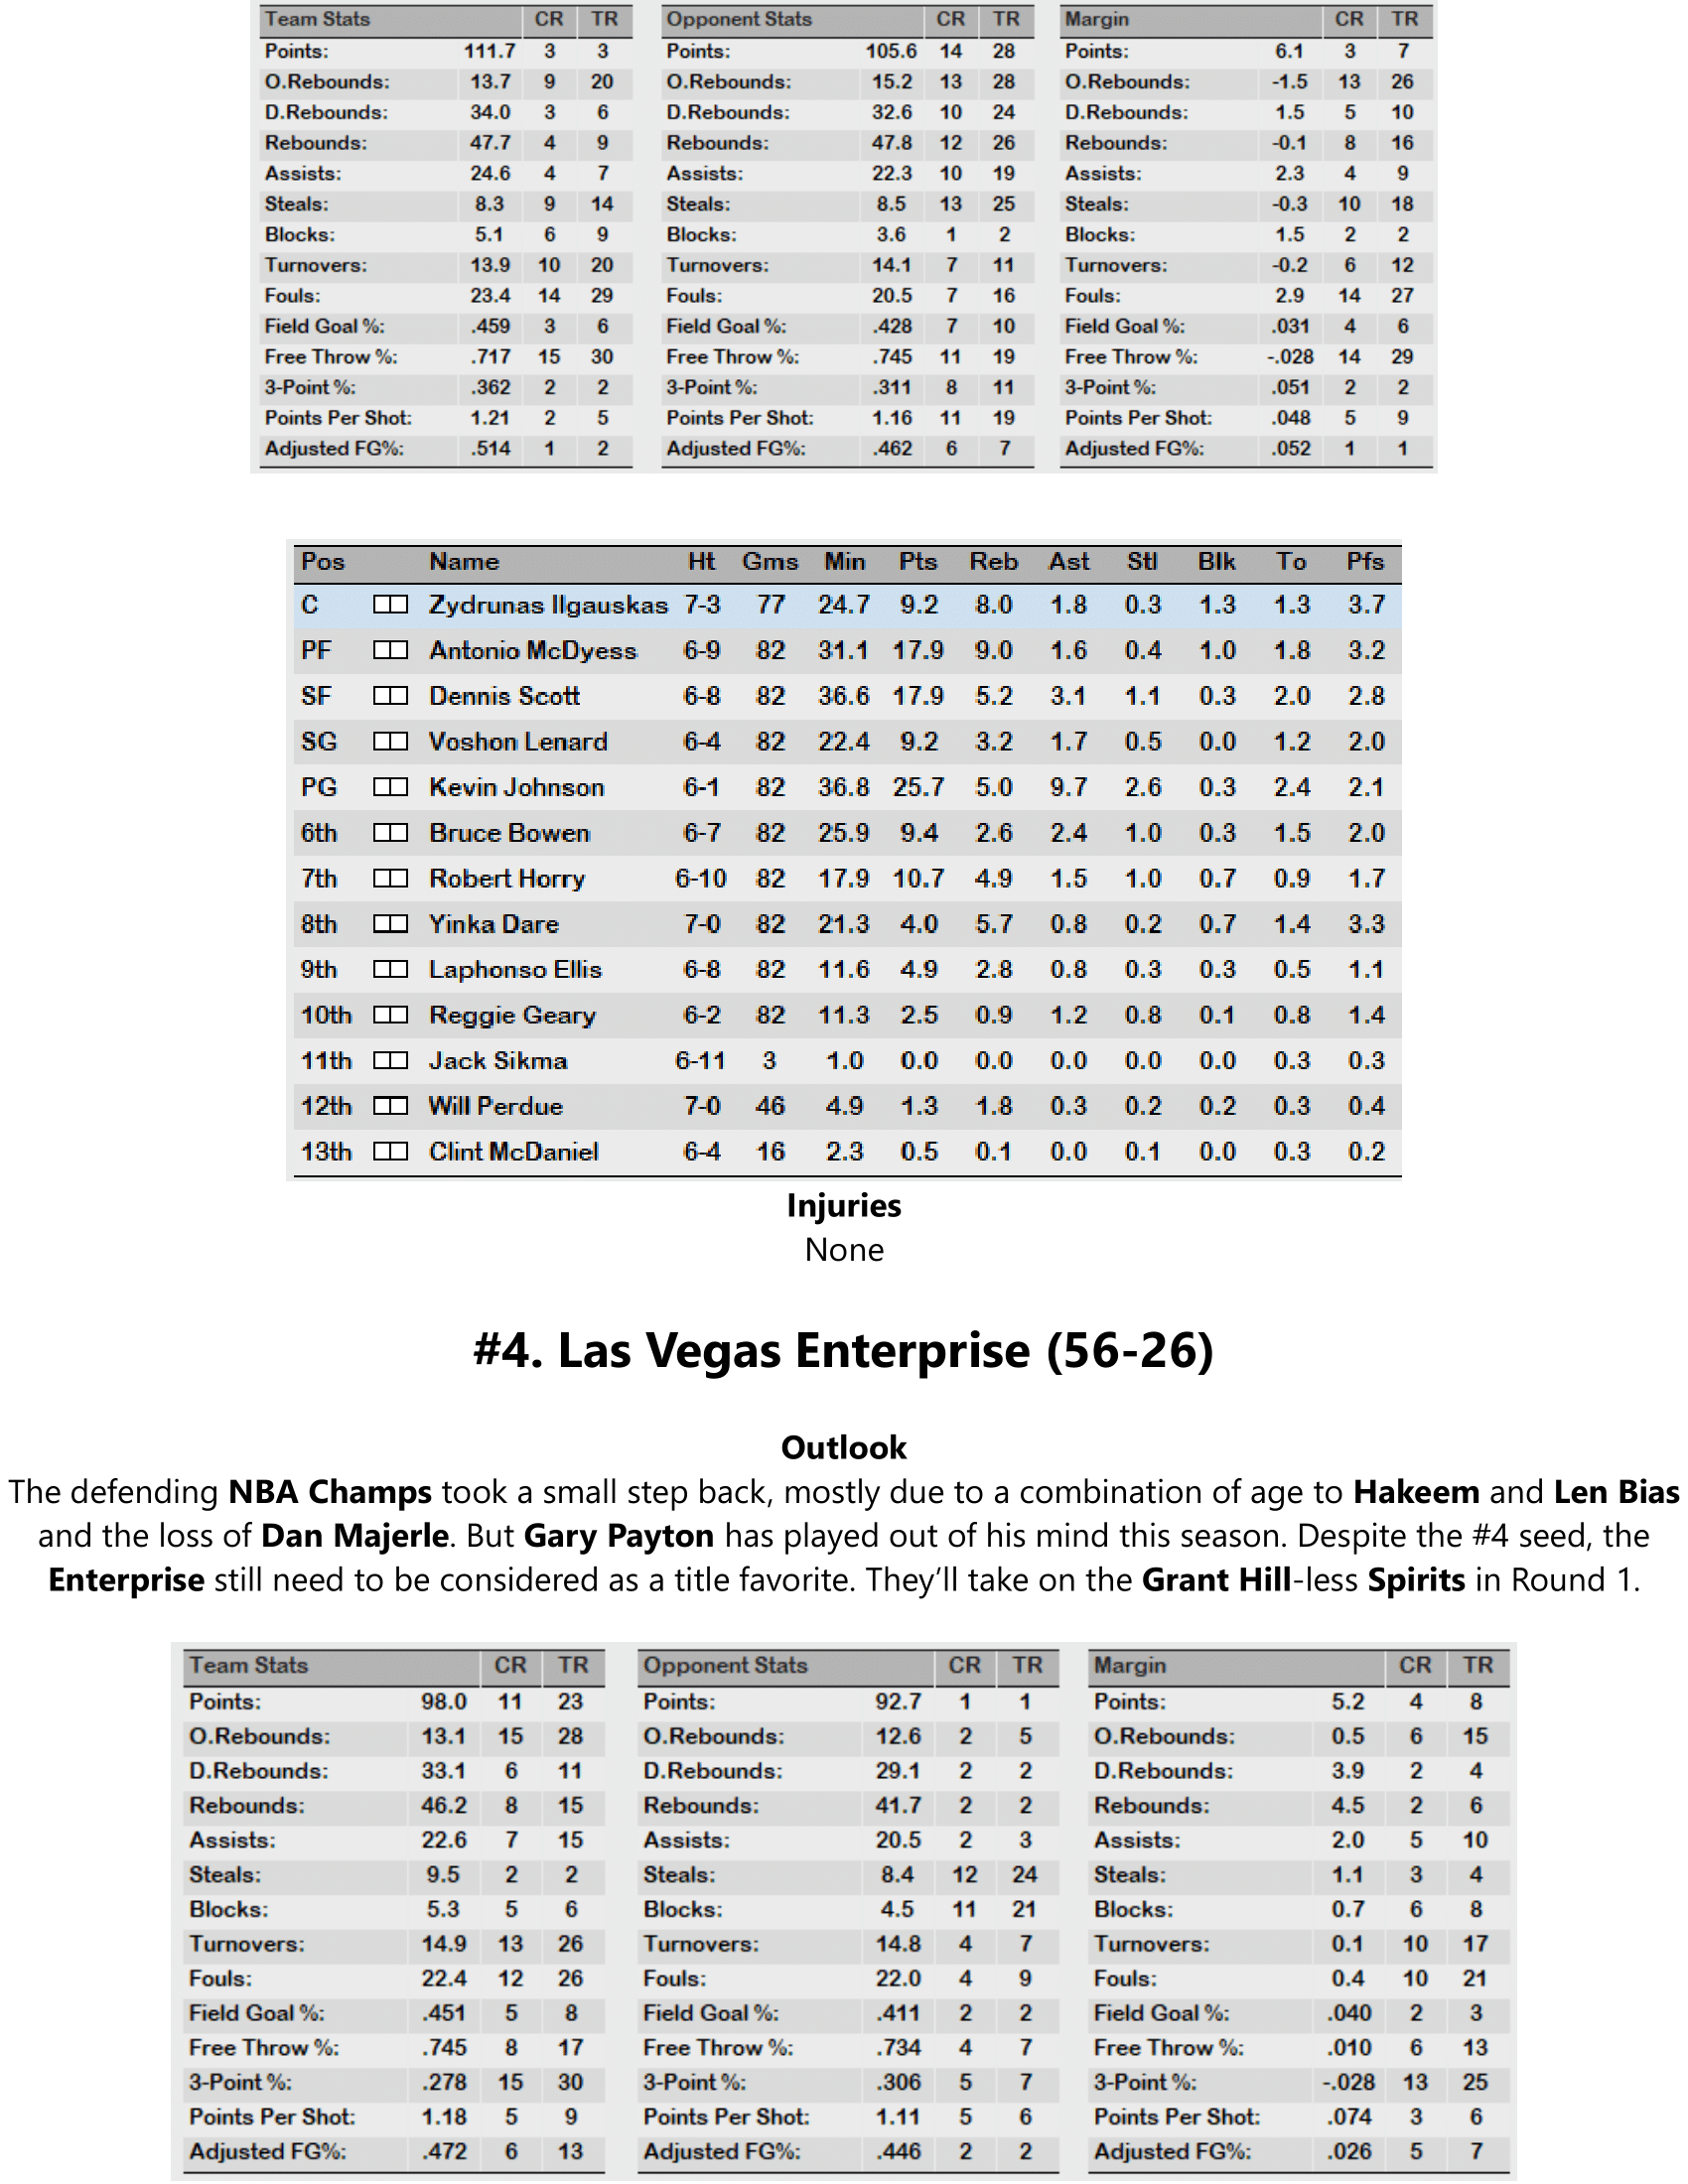 96-97-Part-3-Playoff-Preview-05.png